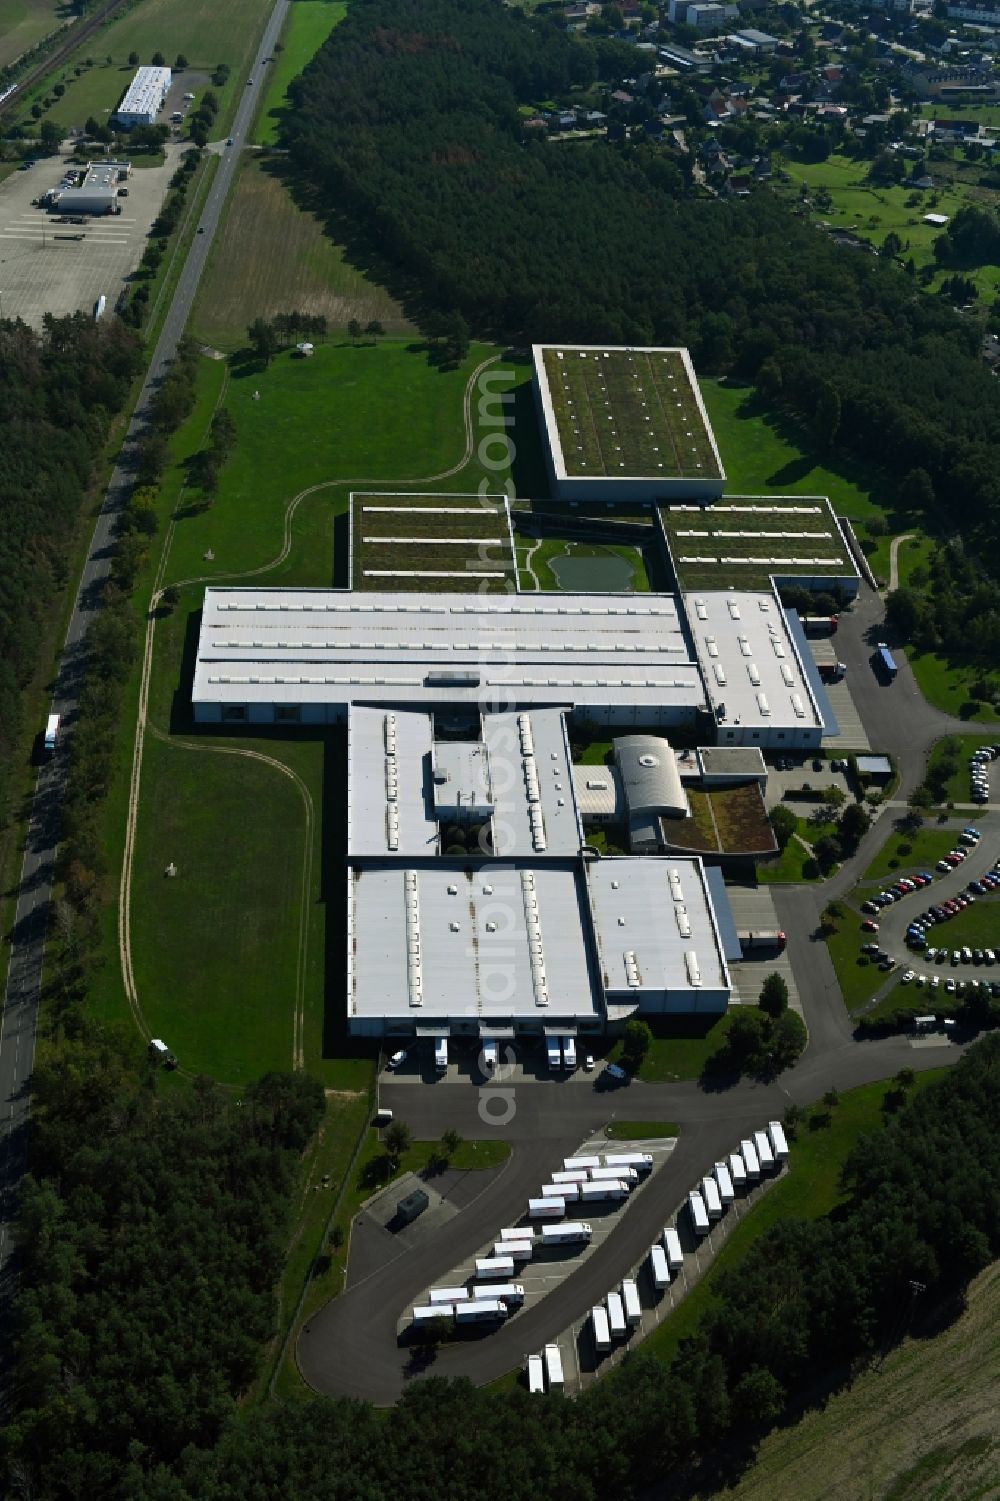 Coswig (Anhalt) from above - Building complex and grounds of the logistics center of ErnstingA?s Family GmbH&Co.KG in the district Klieken in Coswig (Anhalt) in the state Saxony-Anhalt, Germany